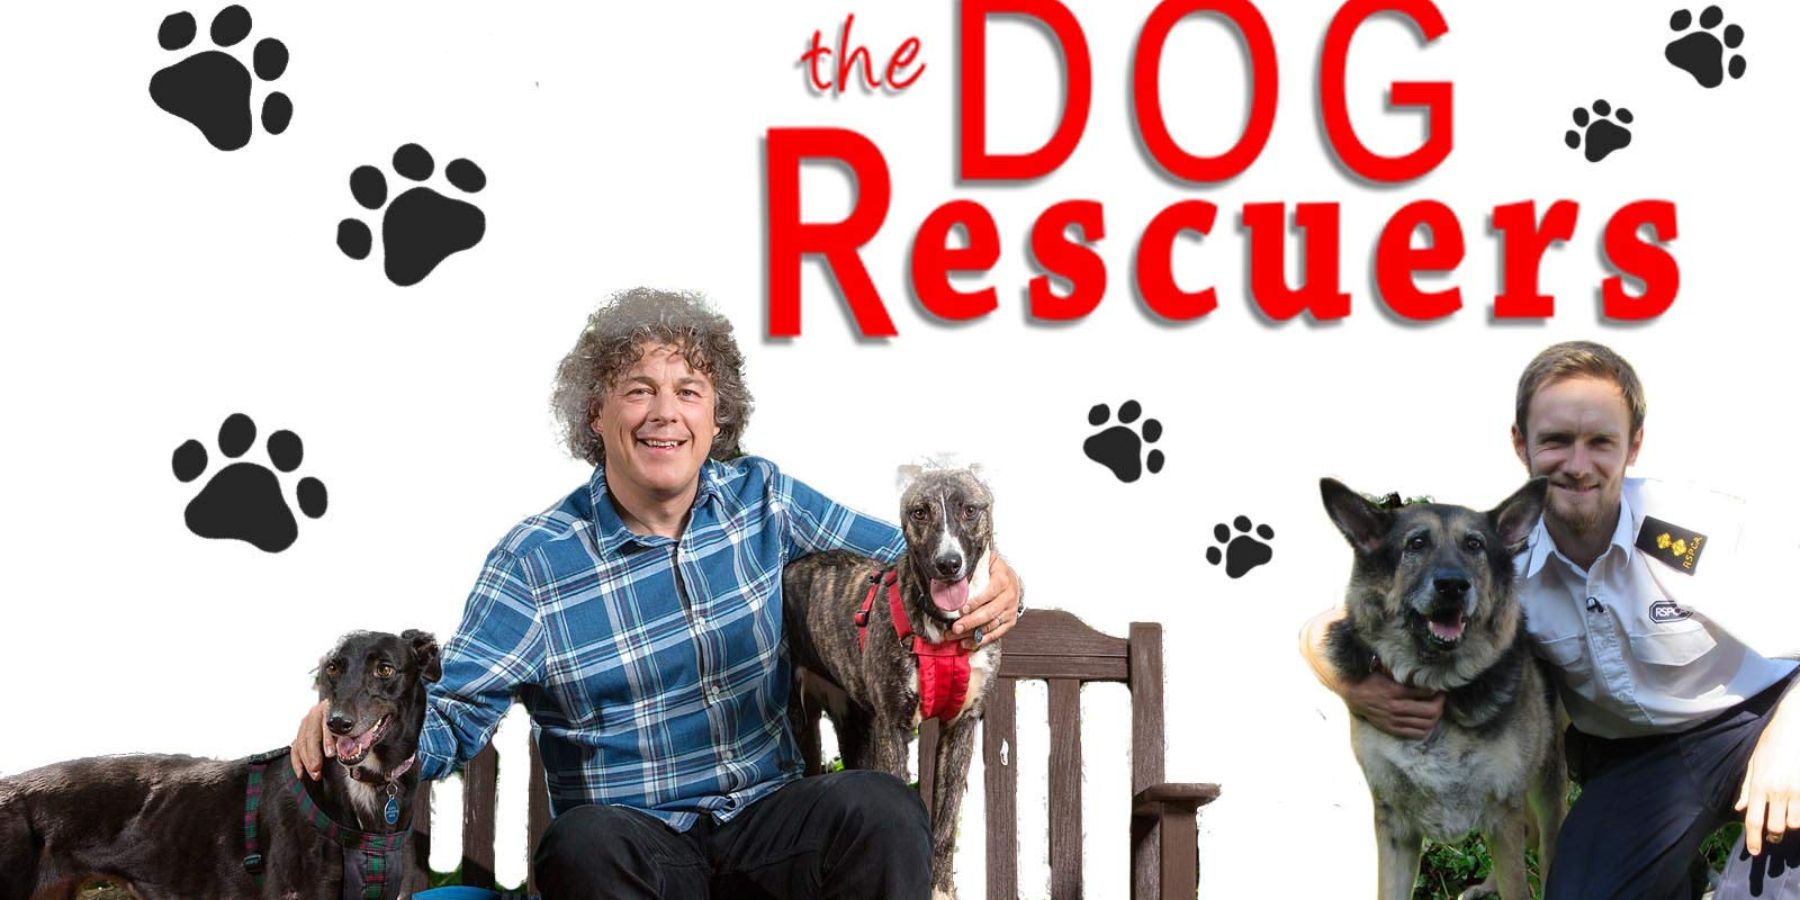 The Dog Rescuers on Amazon Prime Video